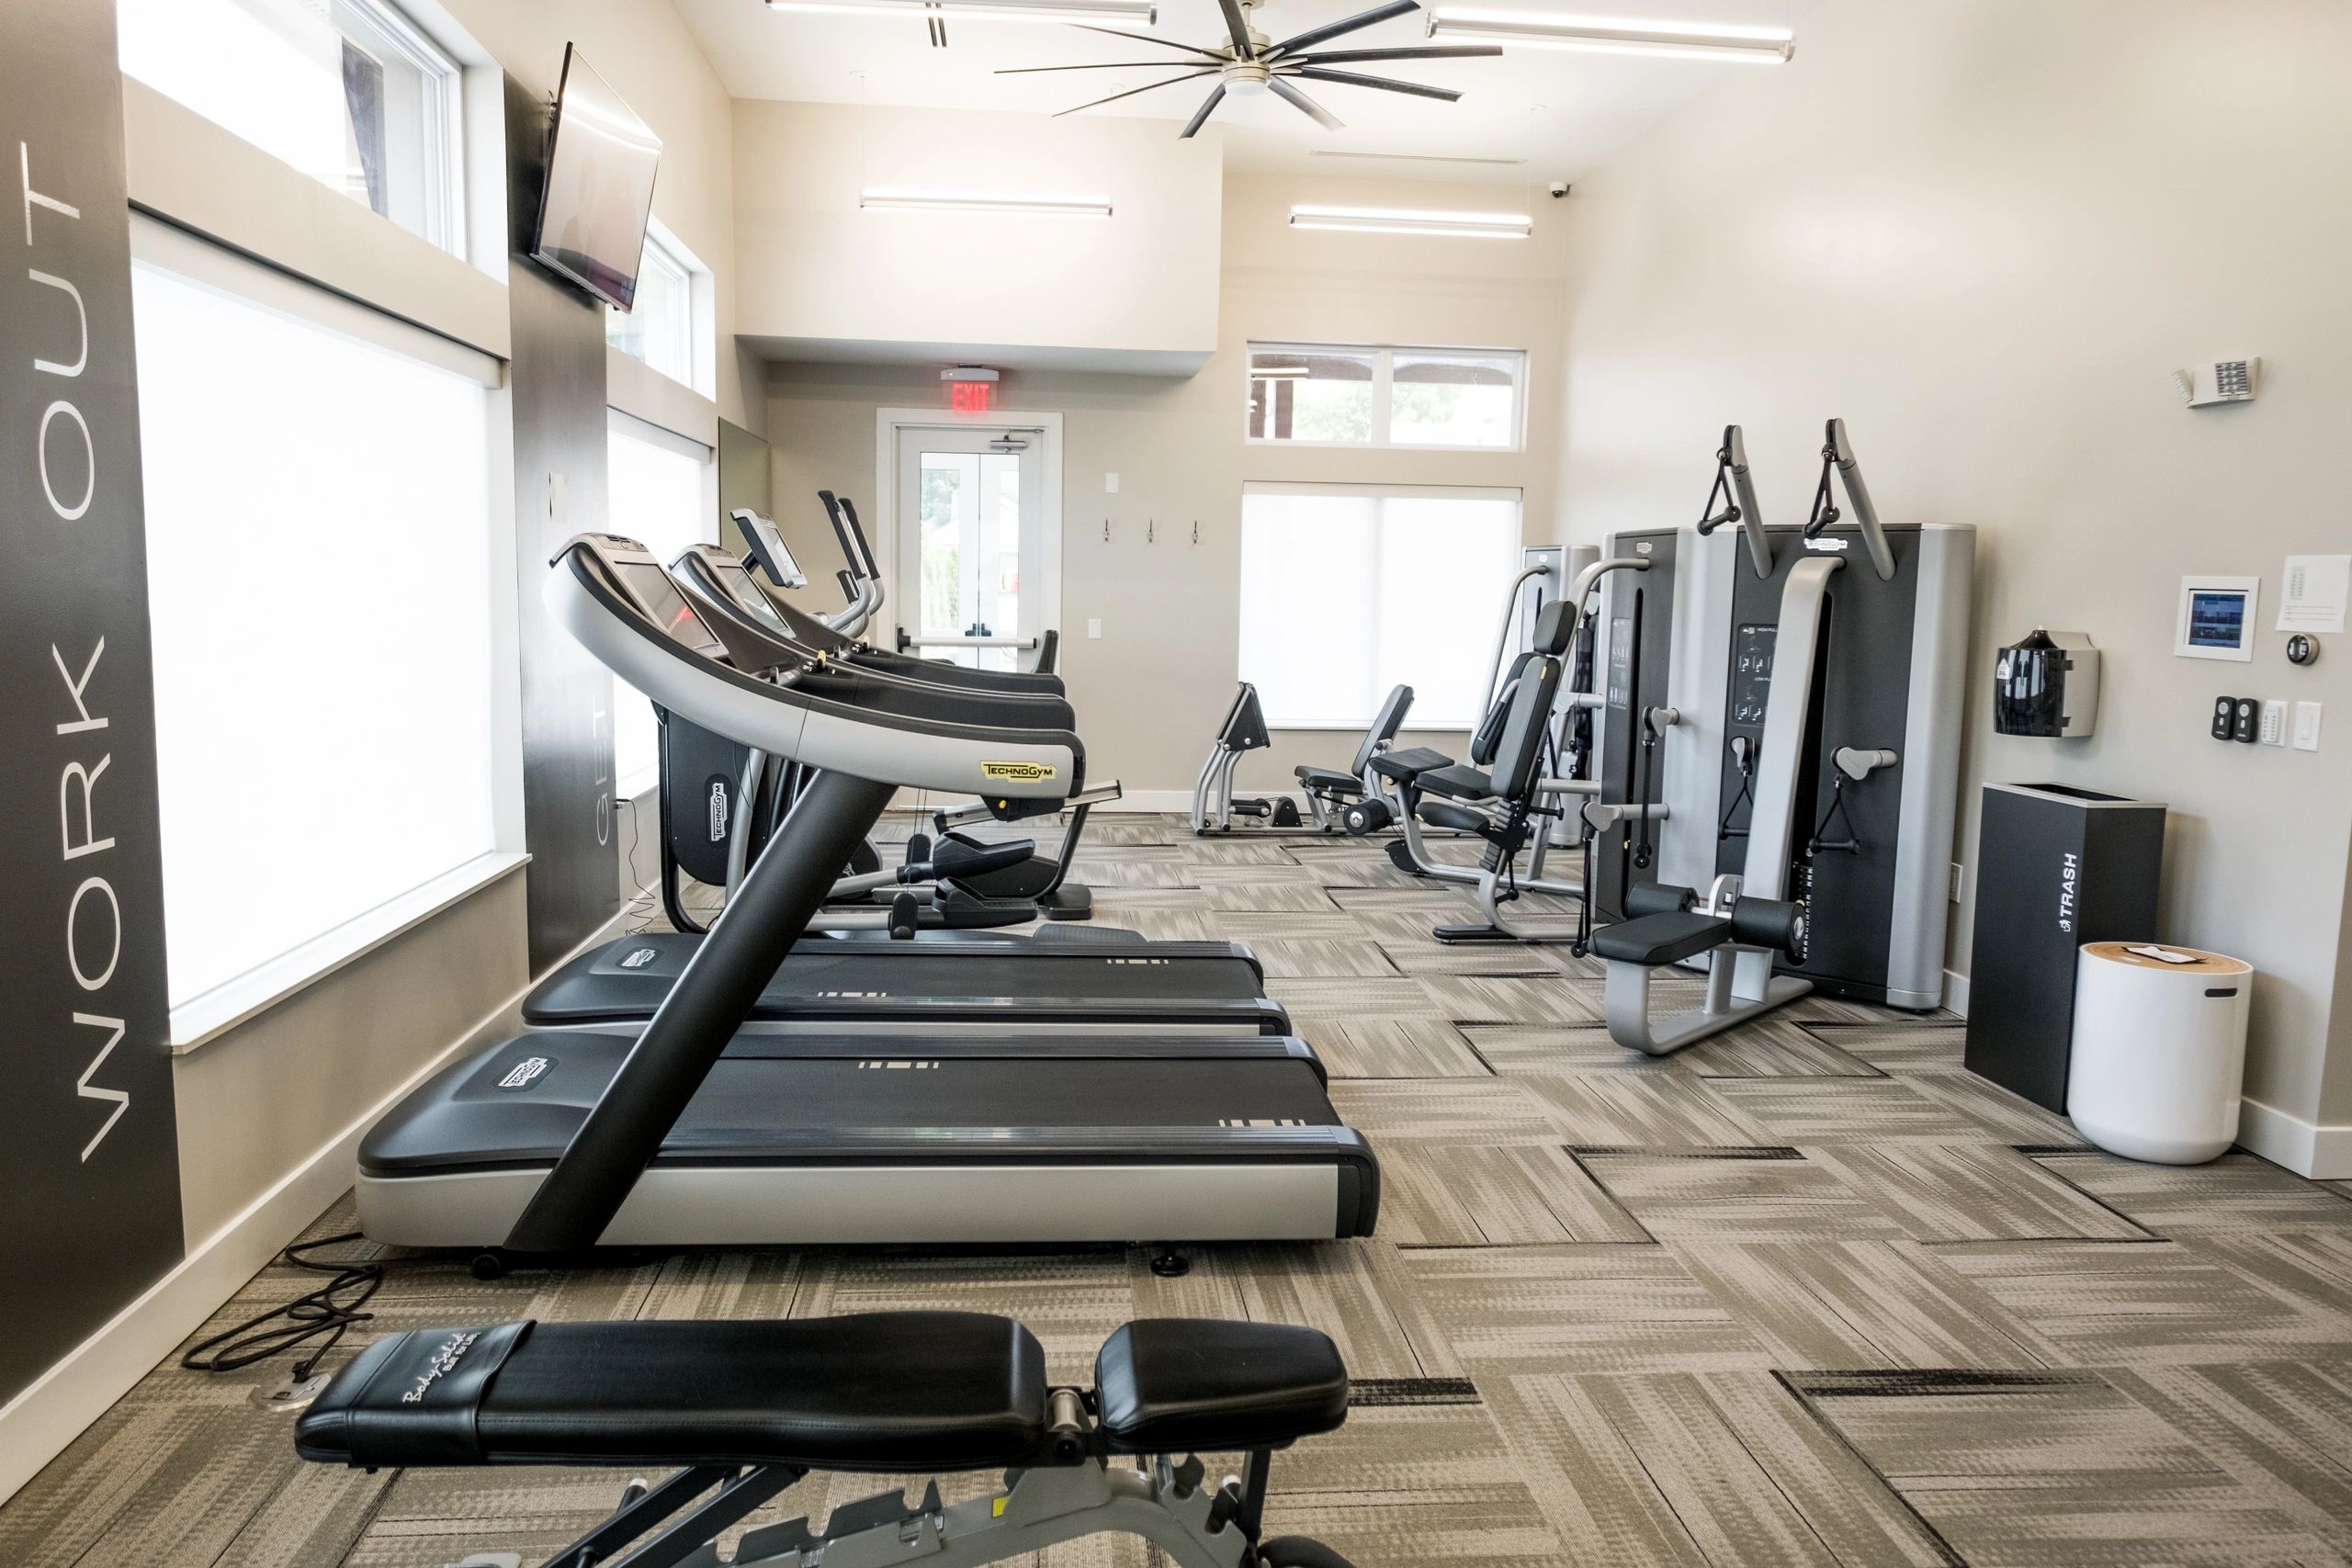 Preserve at Willow Springs 24-hour fitness center